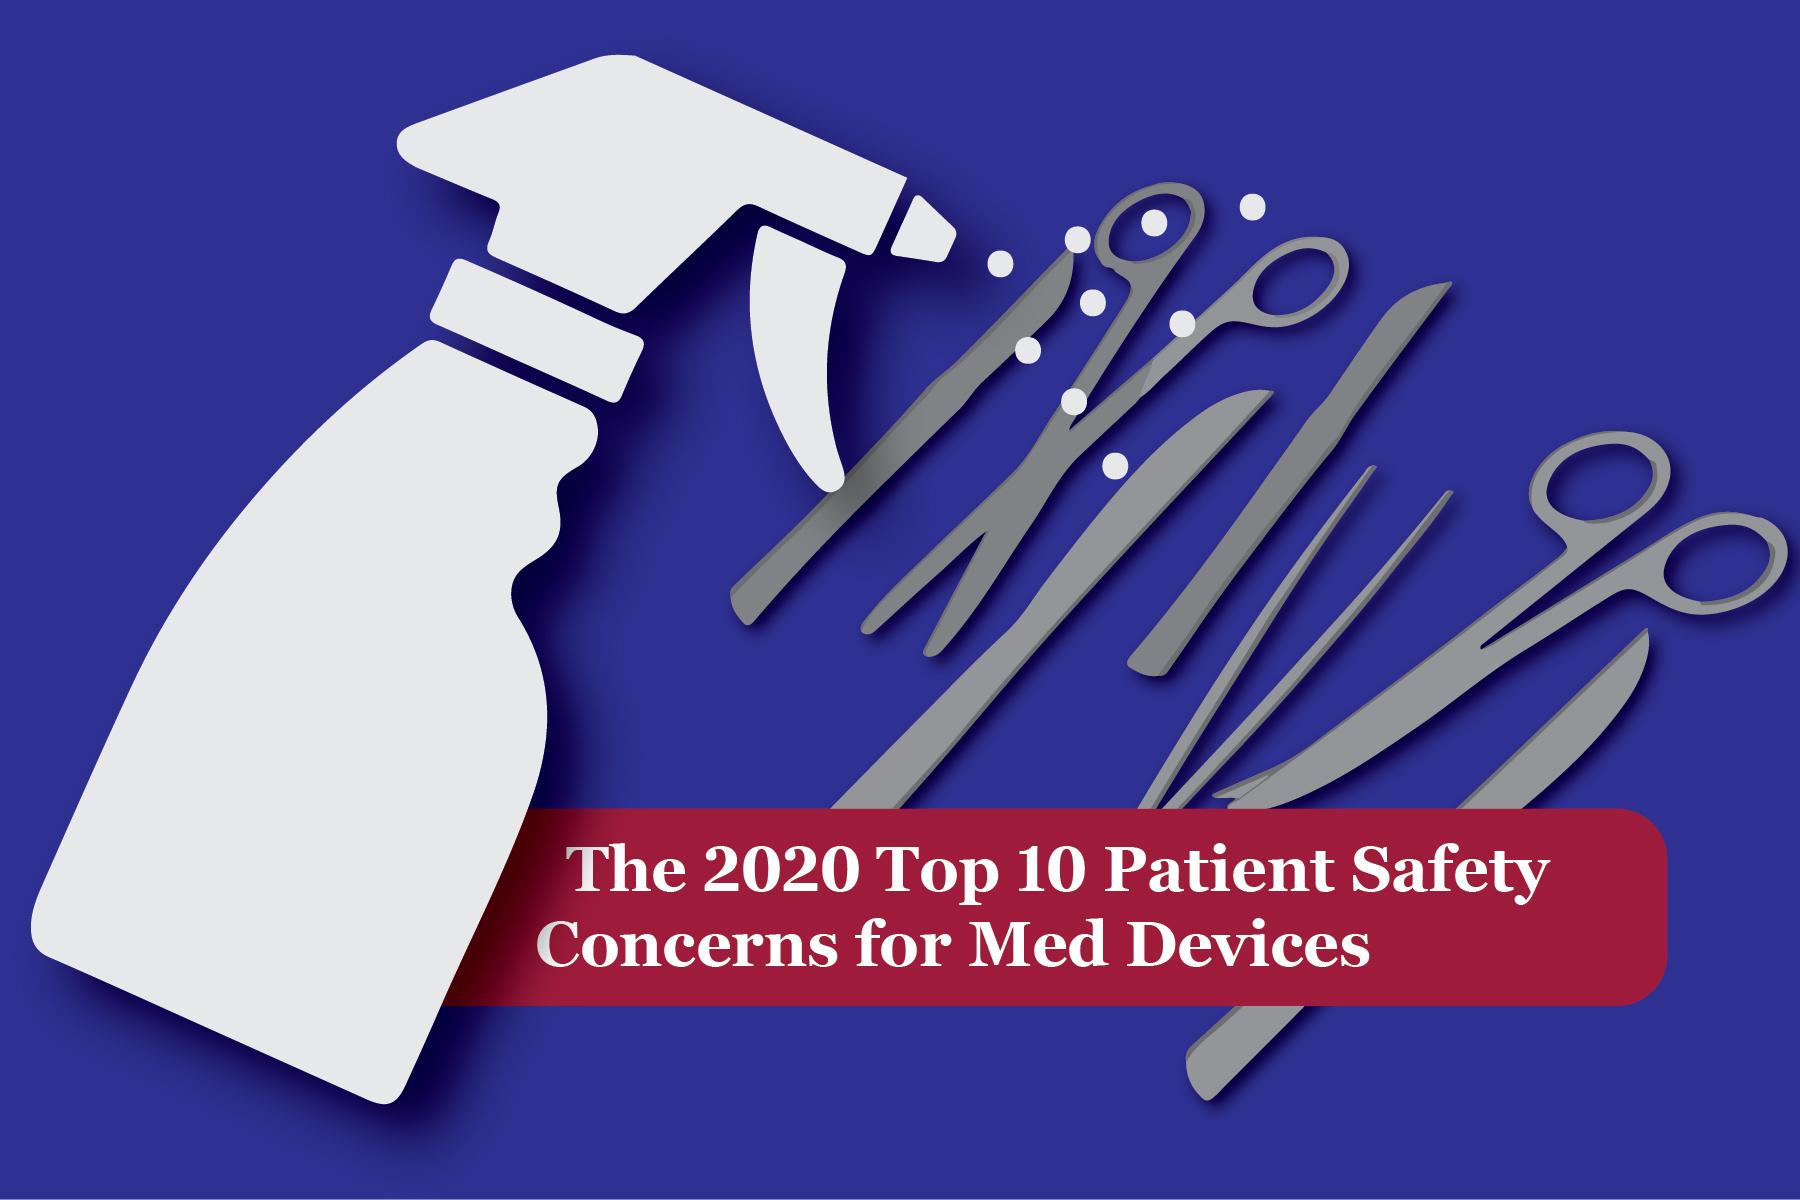 The 2020 Top 10 Patient Safety Concerns for Med Devices